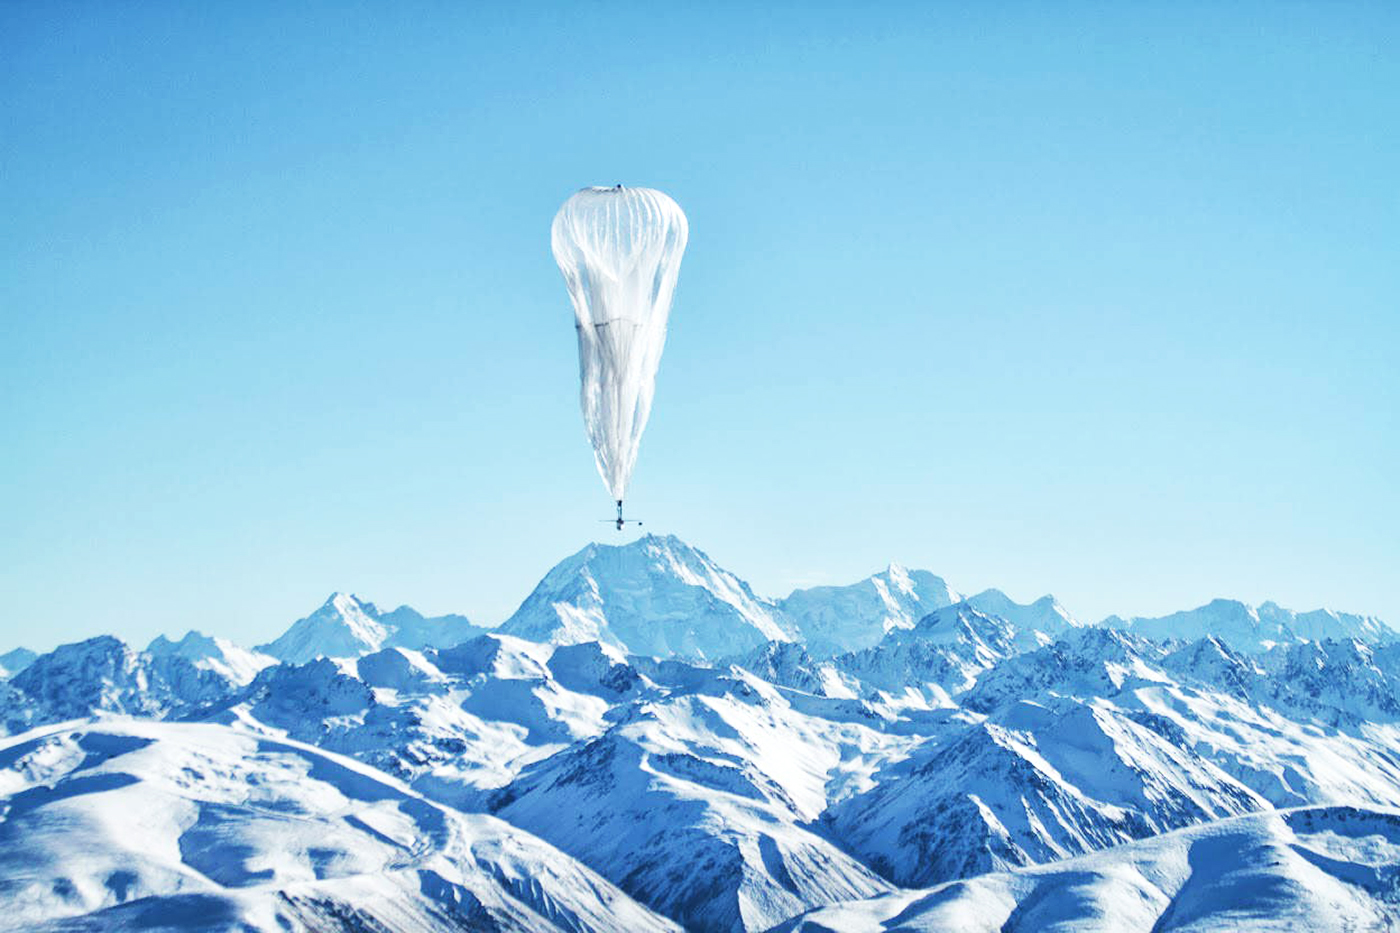 4-project-loon Six new technologies that will enable faster, better internet to the world